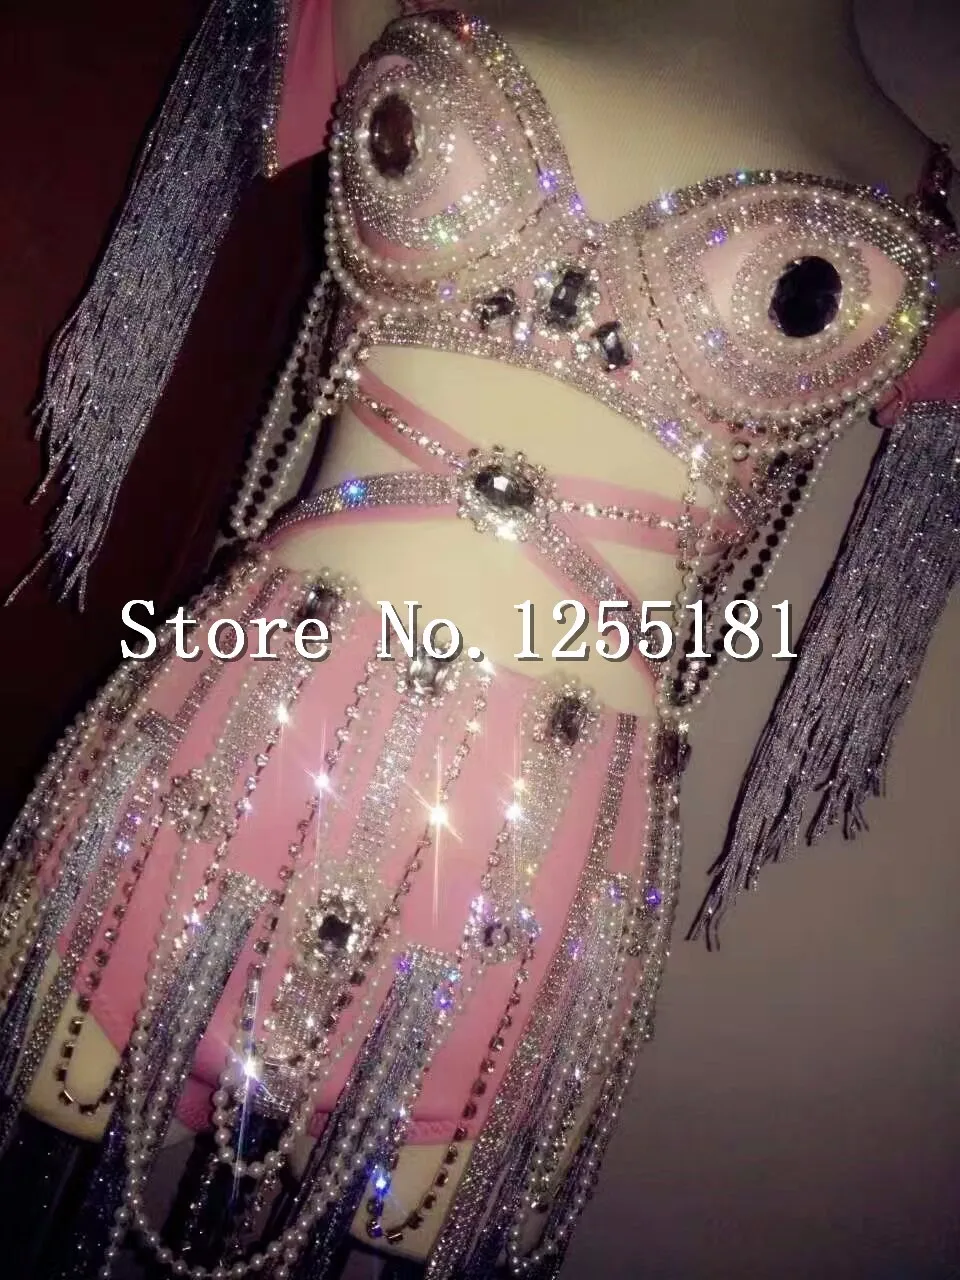 Bling Rhinestone Rose Bikini Pearls Tassel Chains Outfit Women's Sexy Party Wear Clothing Set Sequins Bodysuits Costumes